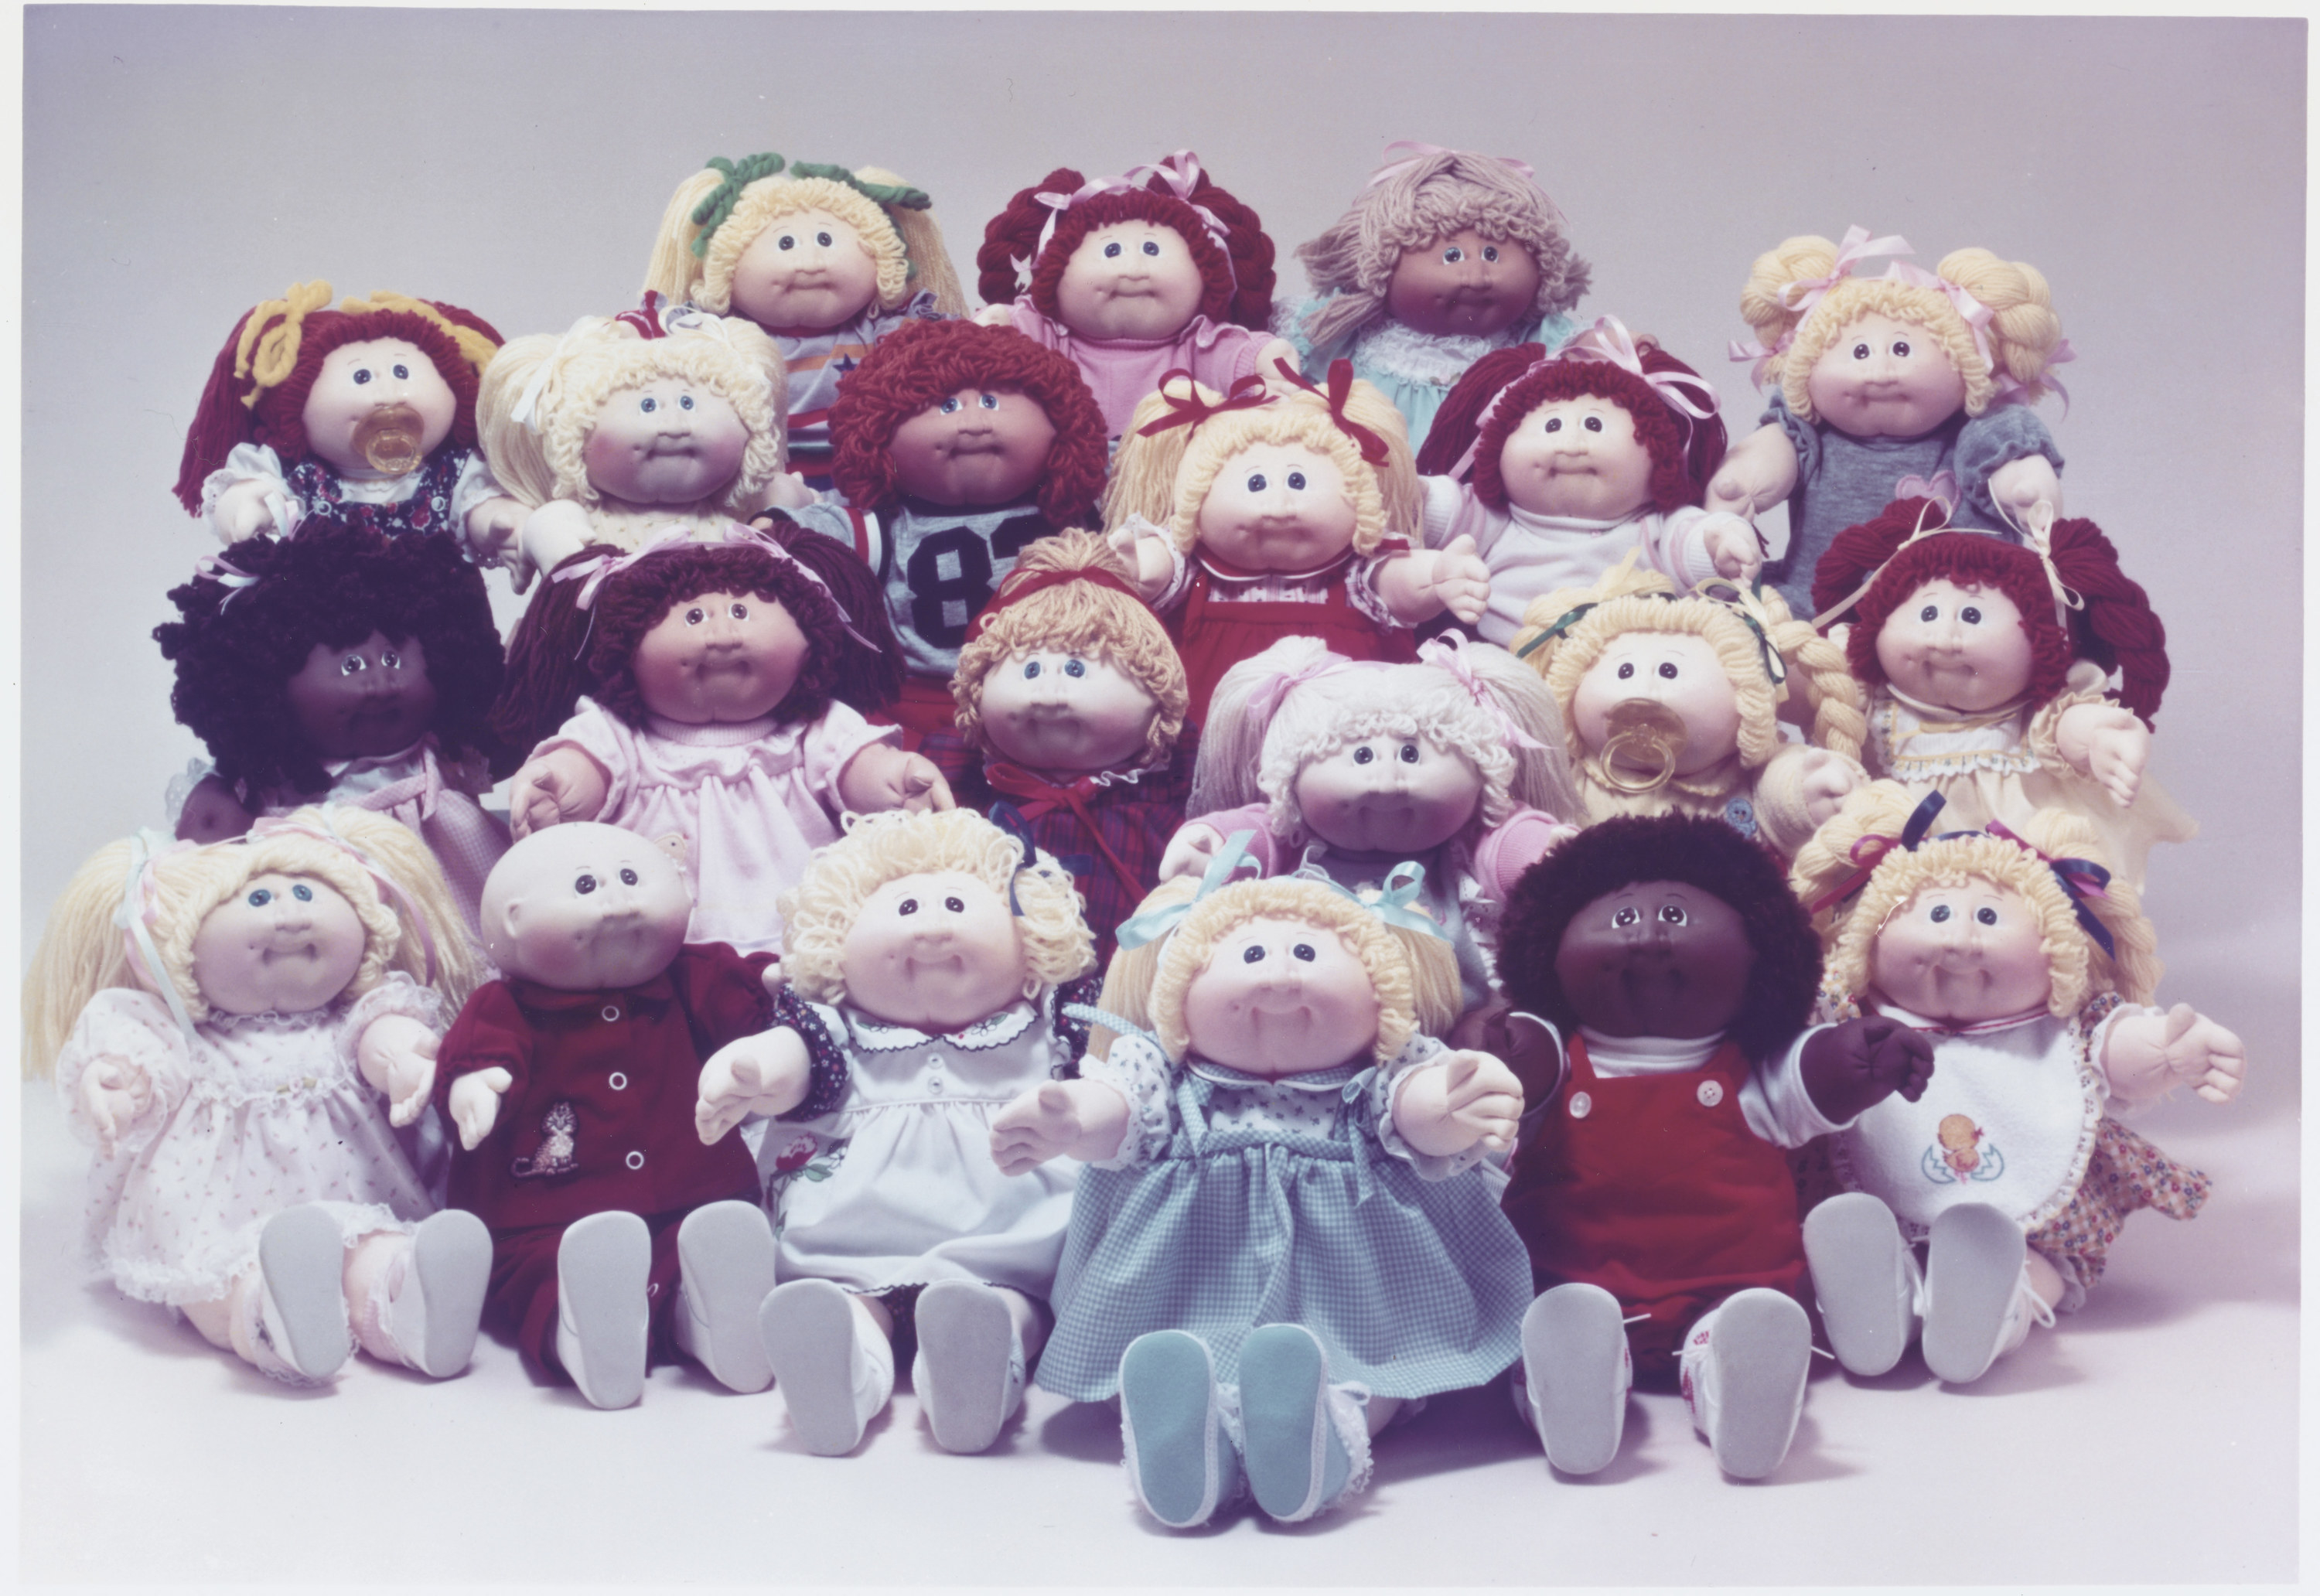 A photo of a large group of Cabbage Patch Kids Dolls